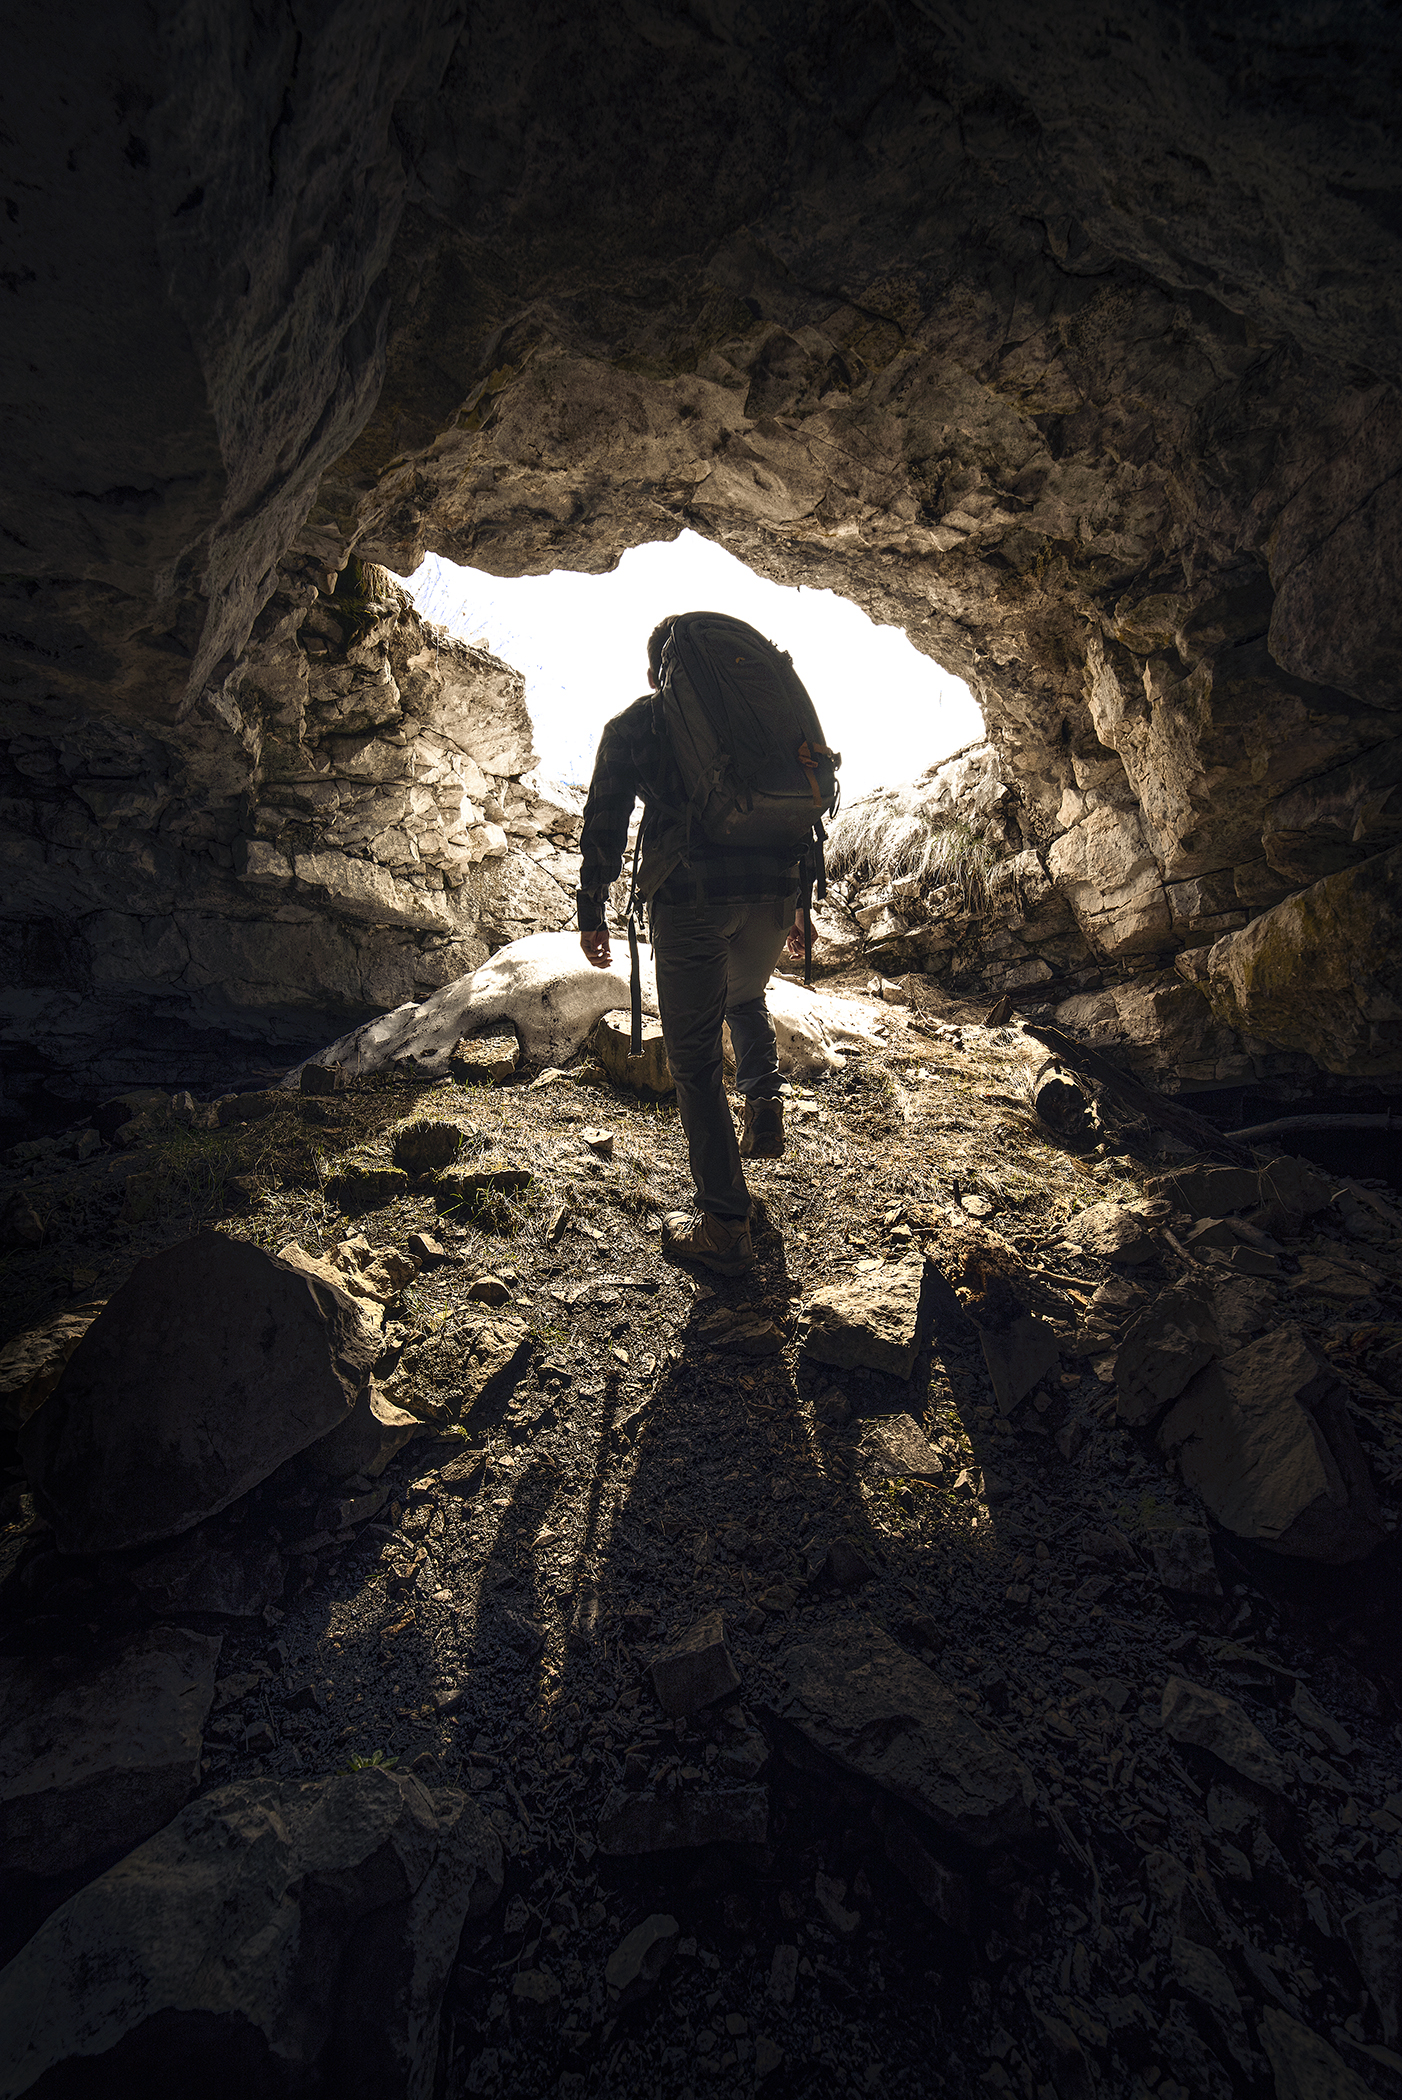 A caver with a pack walking towards the entrance of a Black Hills Cave